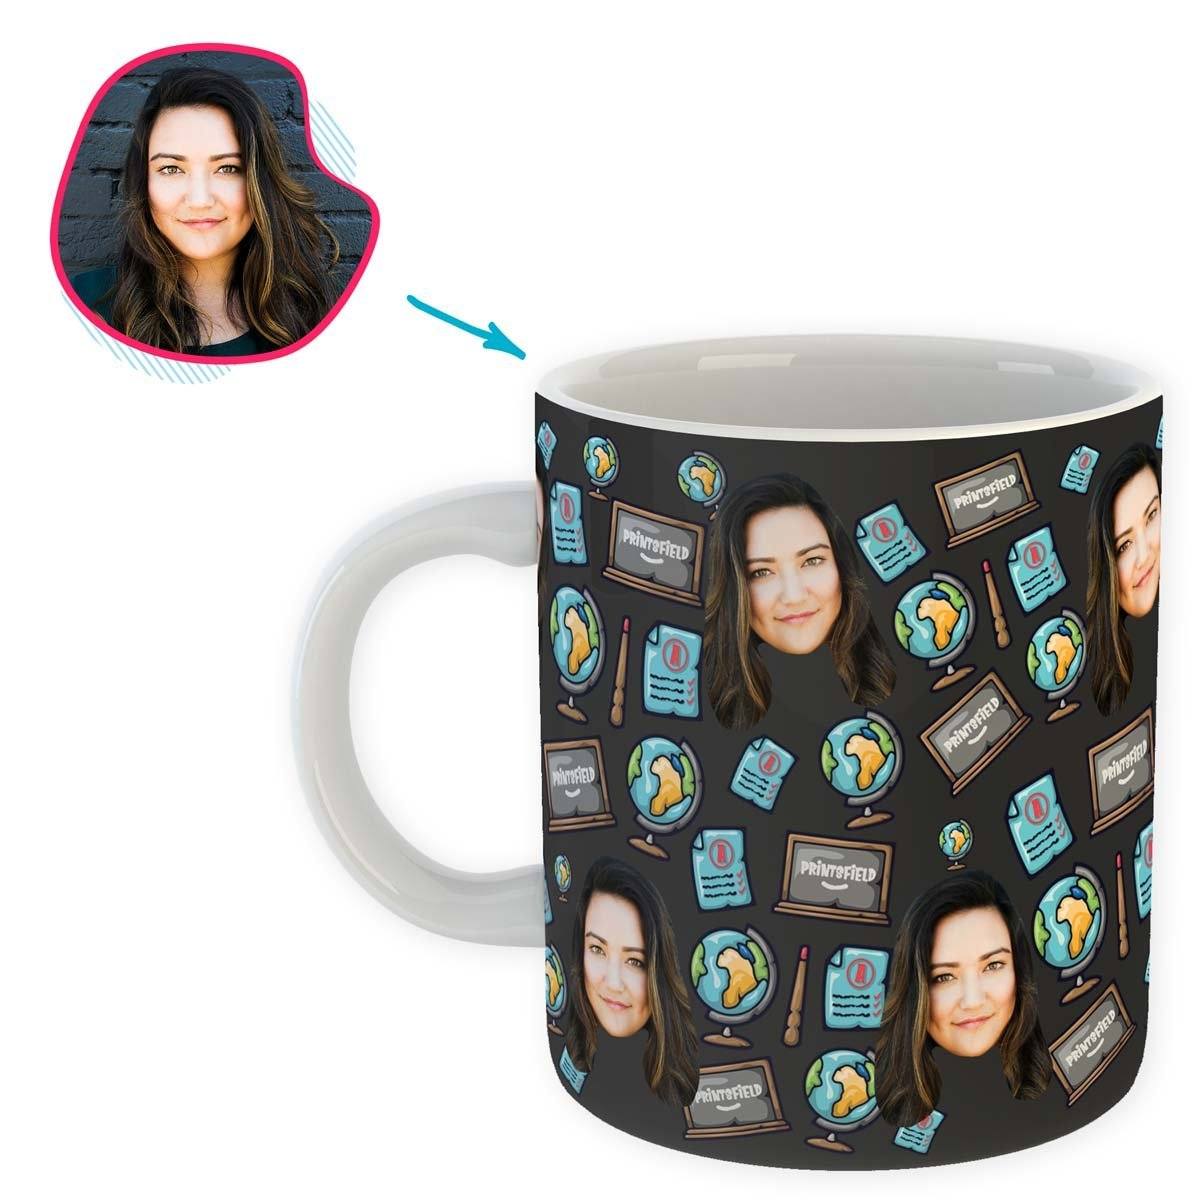 Dark Teacher personalized mug with photo of face printed on it